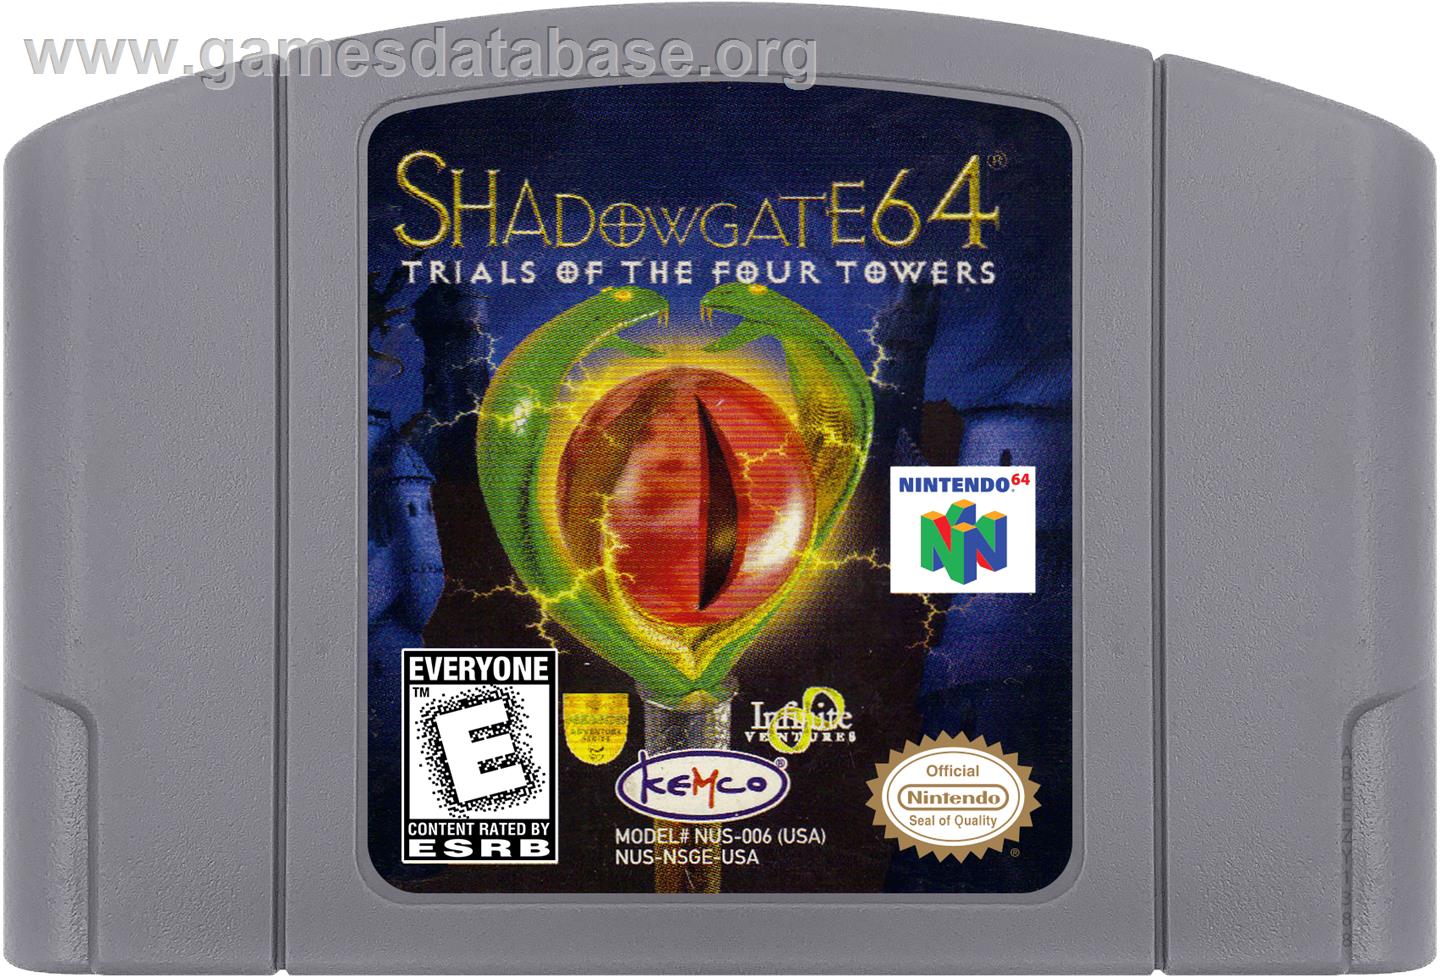 Shadowgate 64: The Trials of the Four Towers - Nintendo N64 - Artwork - Cartridge